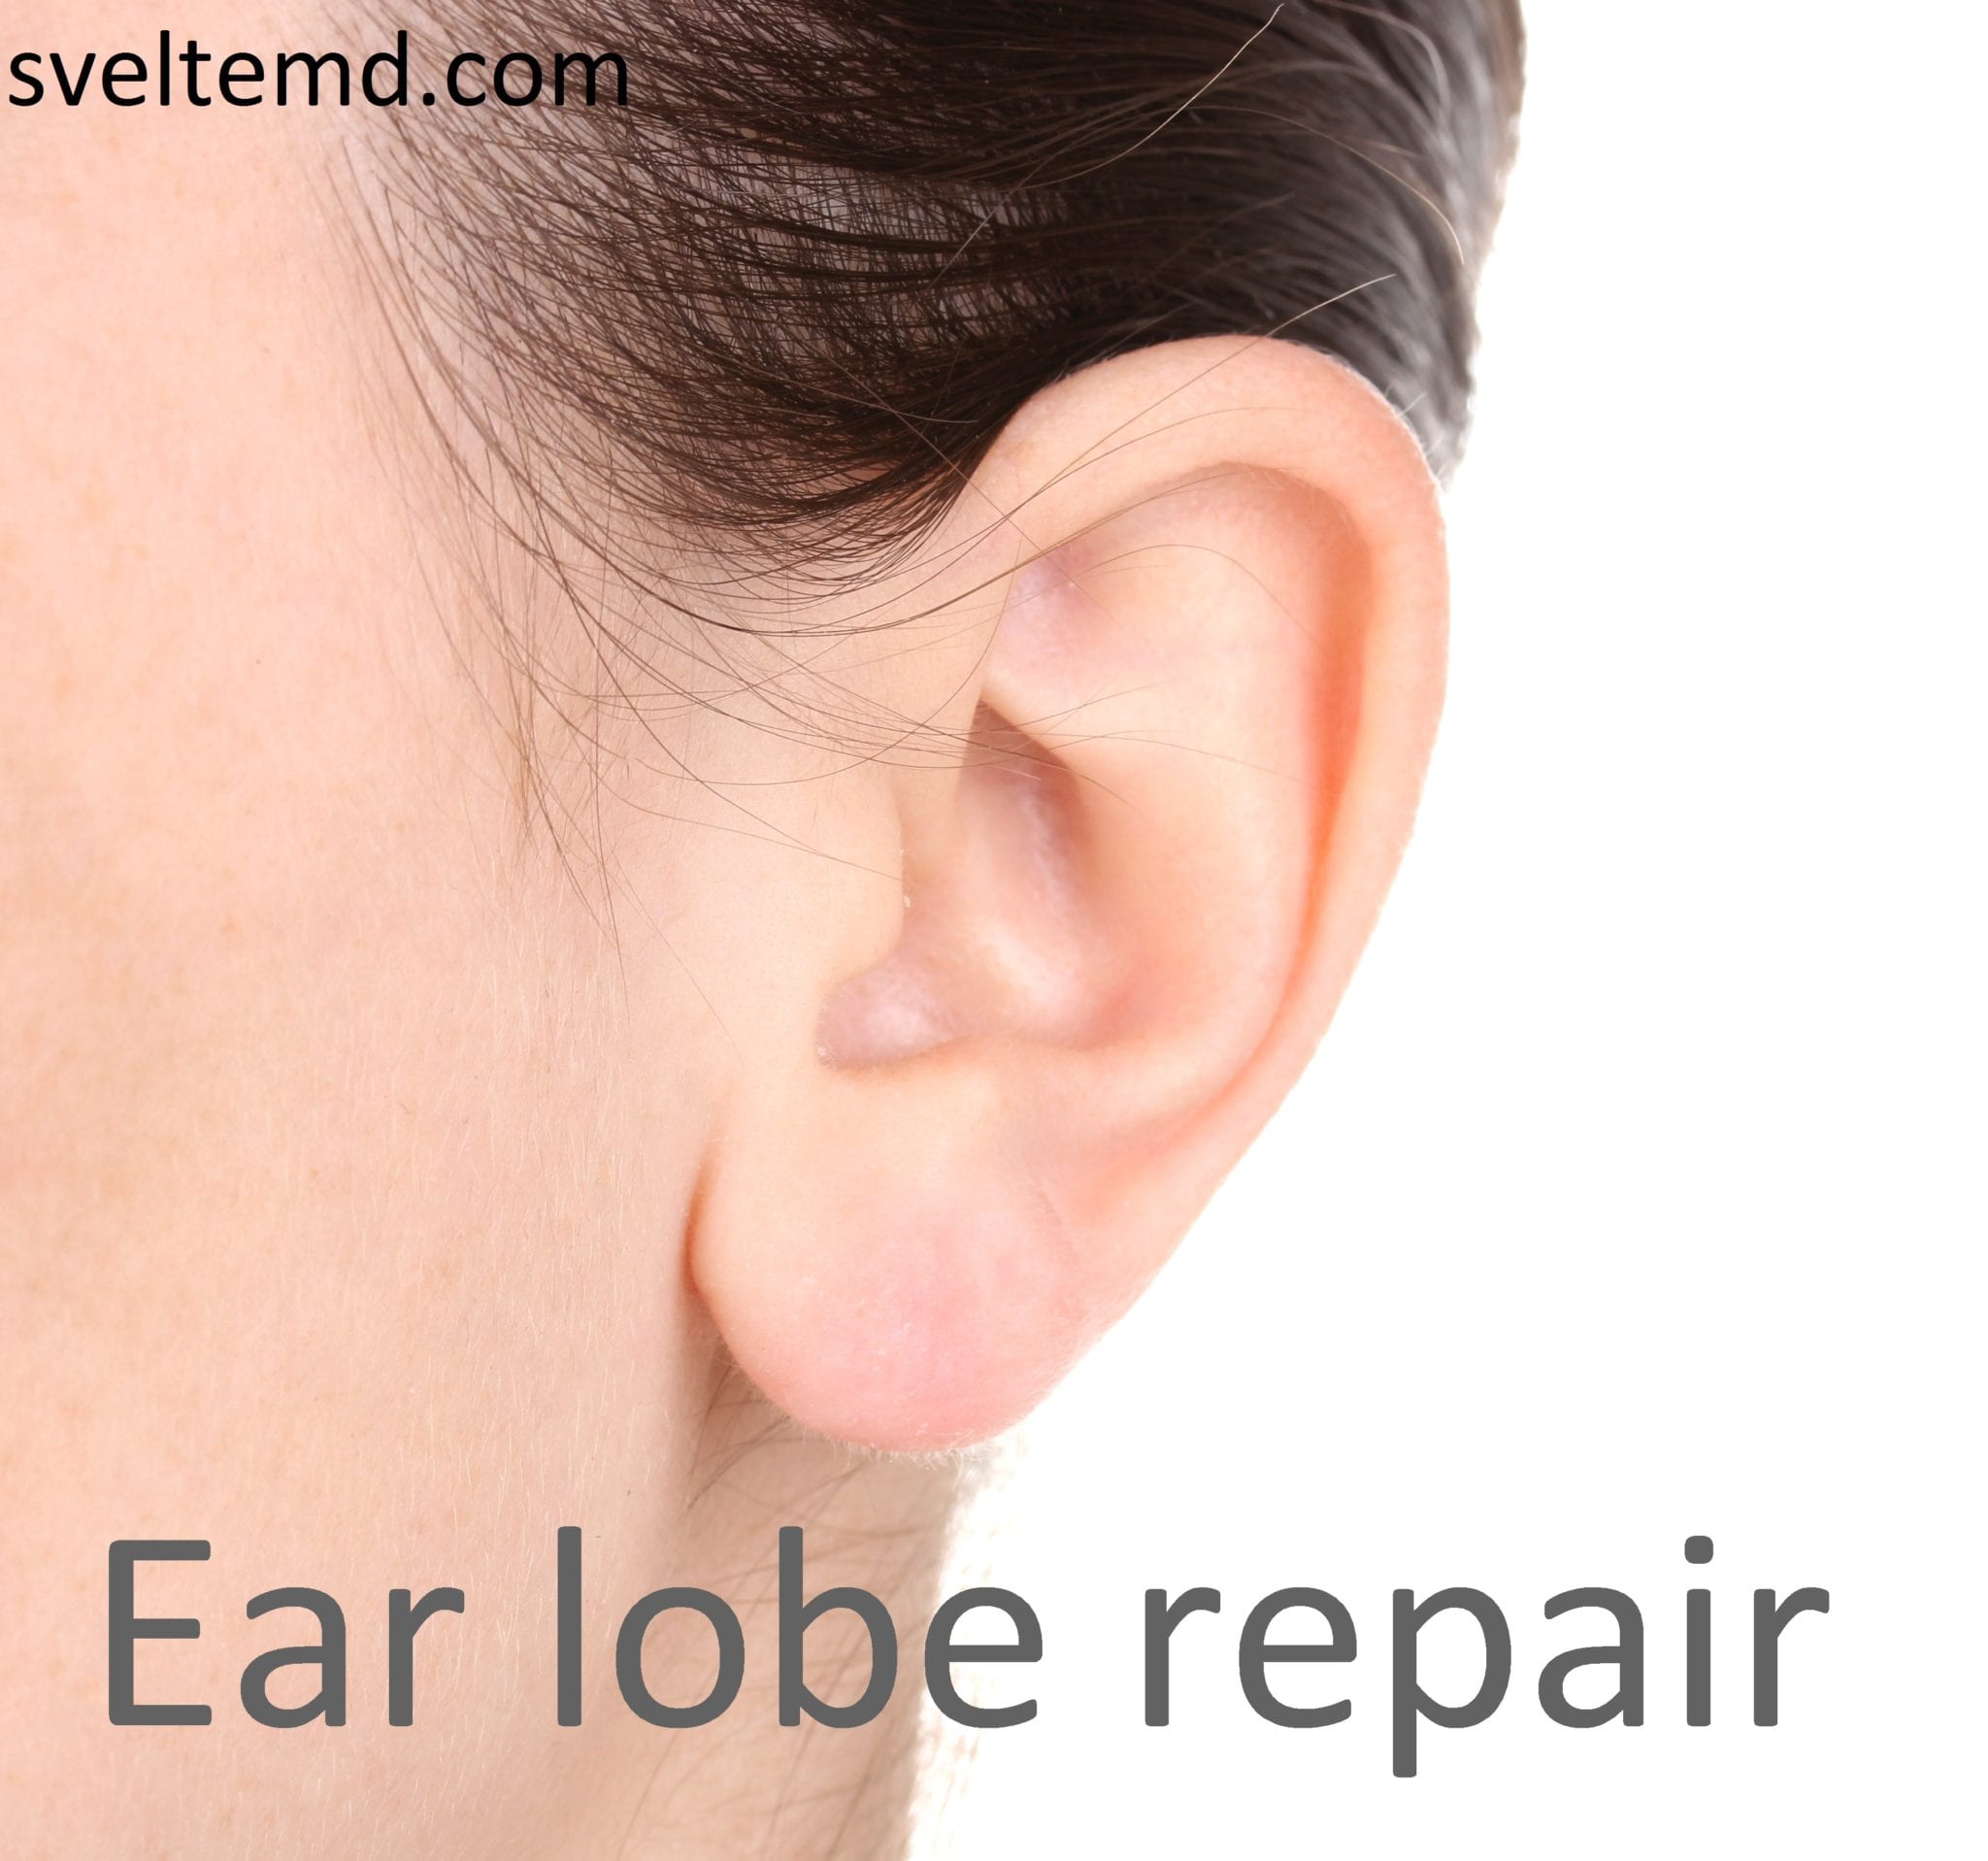 Advanced Homoeo Clinic - Are You Worried about Elongated Ear Lobe??? Do'nt  Worry, Here is a Non-surgical Ear Hole Repair. Hurry up